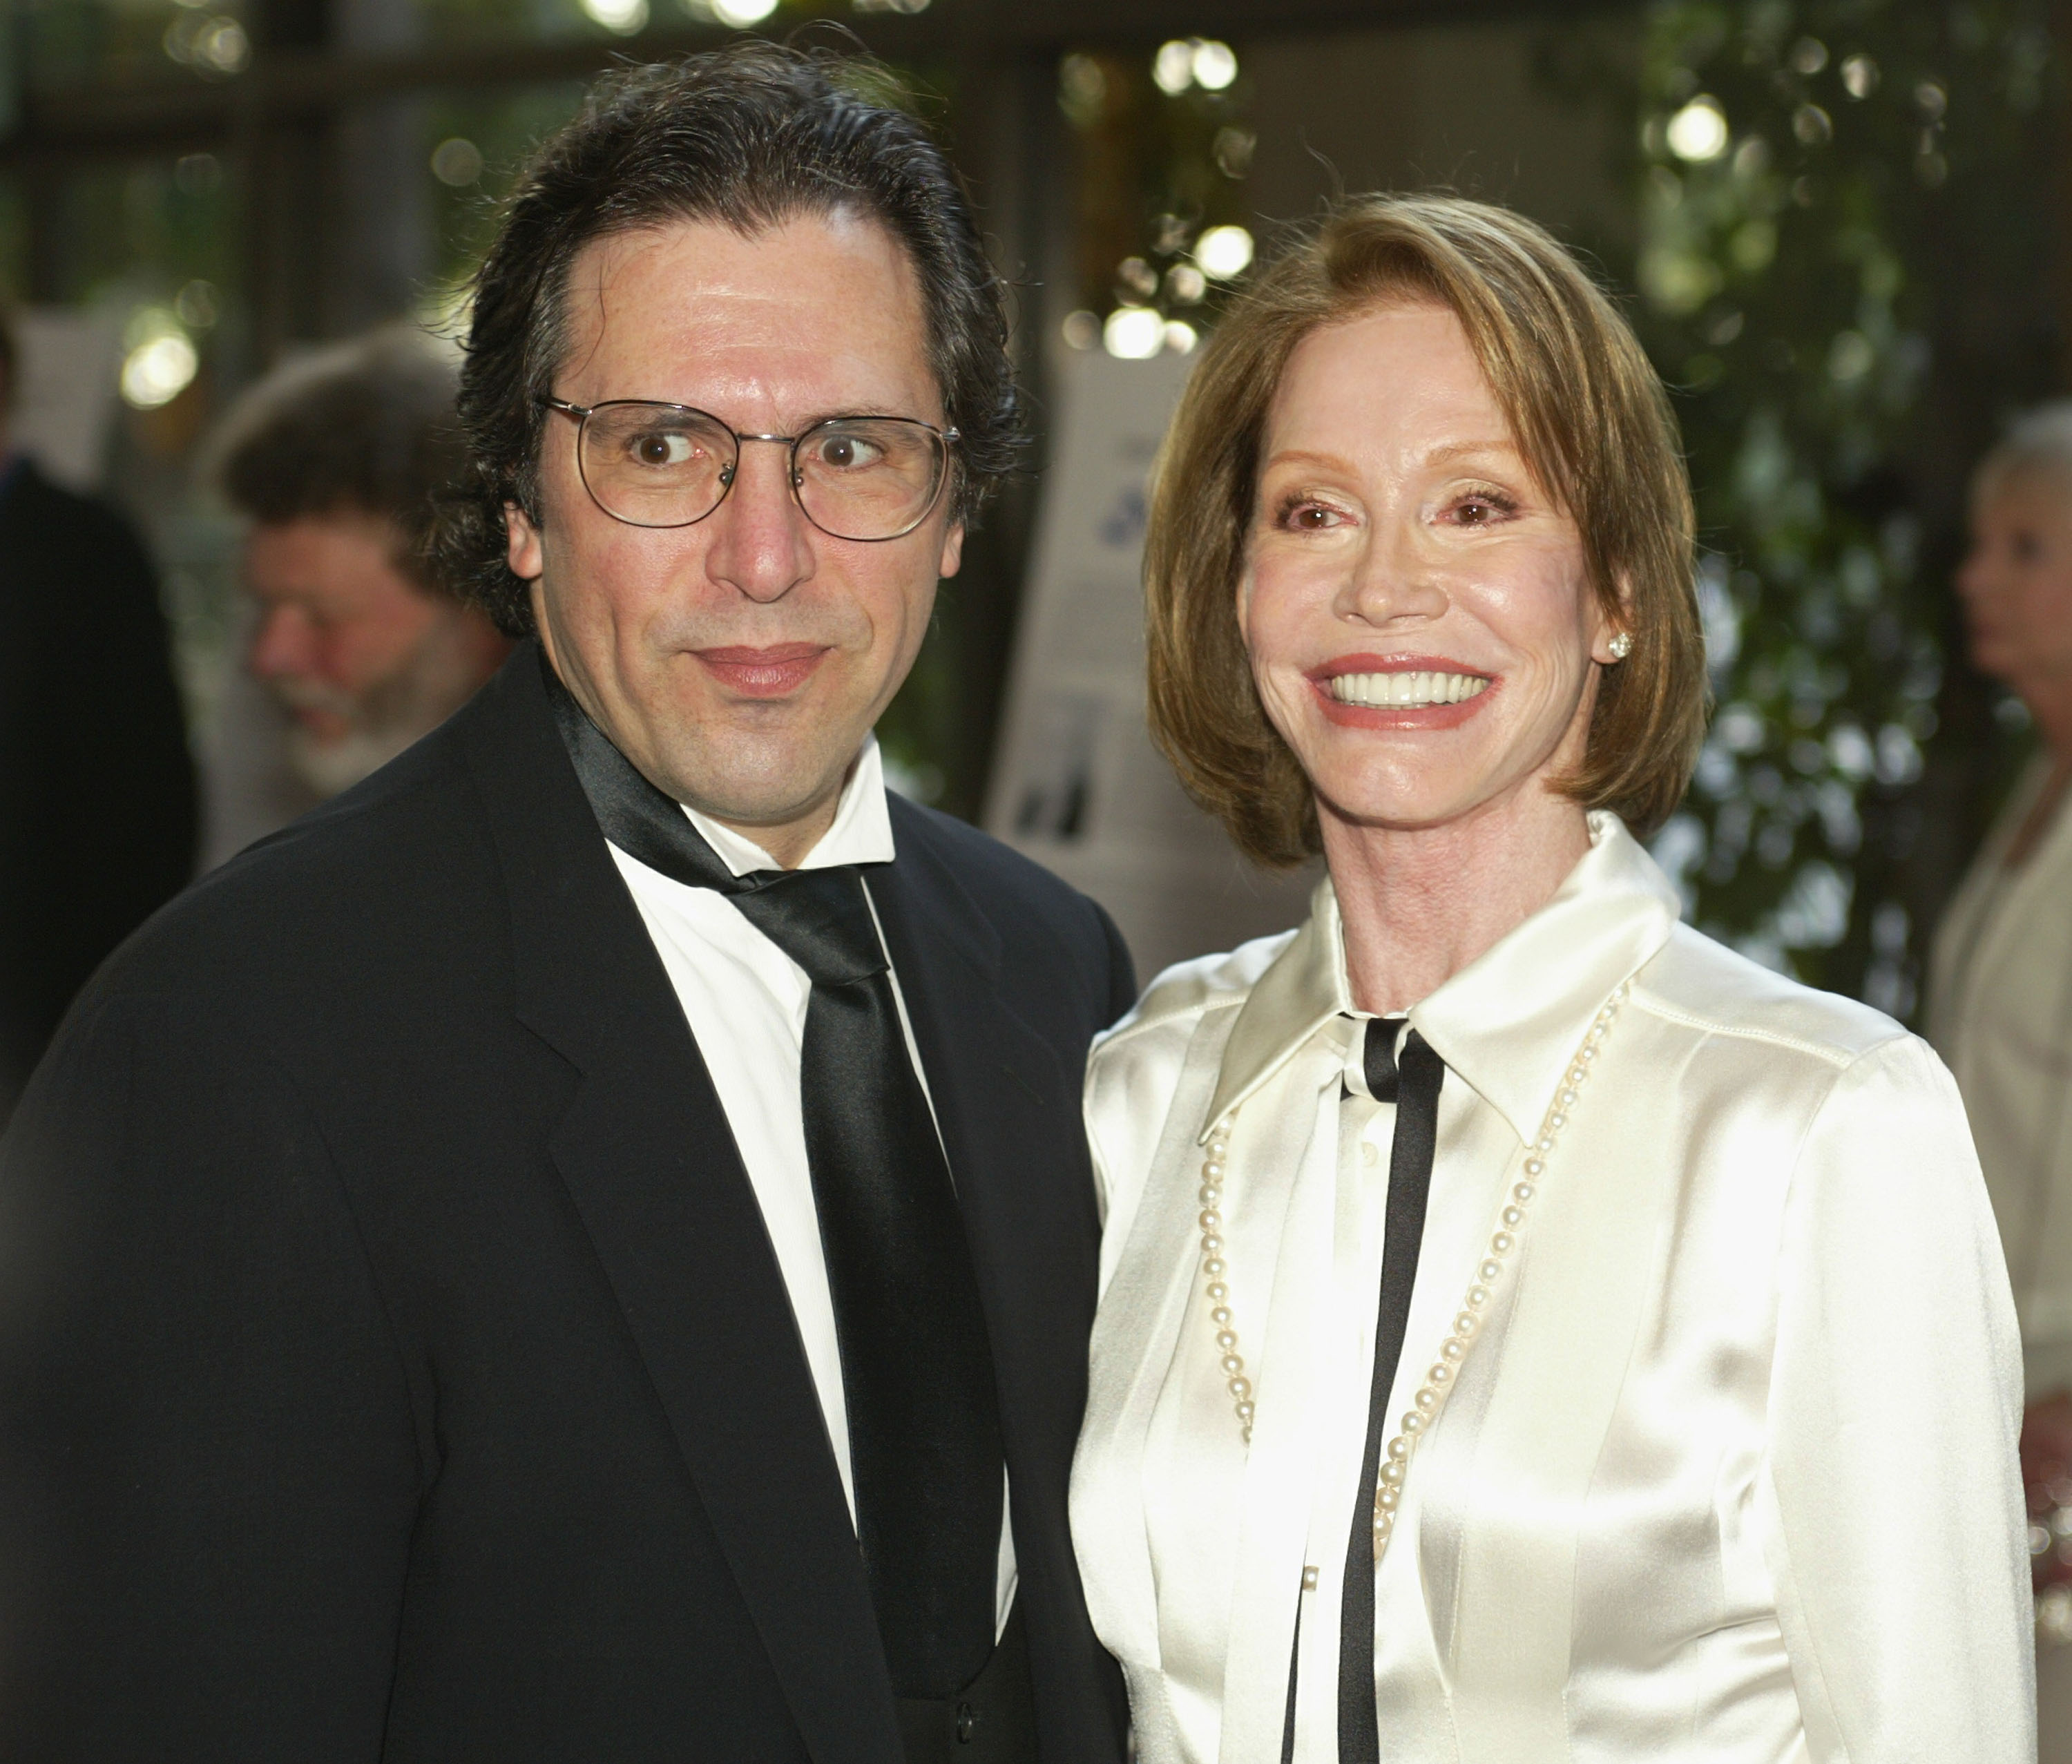 Mary Tyler Moore and Dr. Robert Levine at the 2002 Screenwriting Hall of Fame Awards | Source: Getty Images